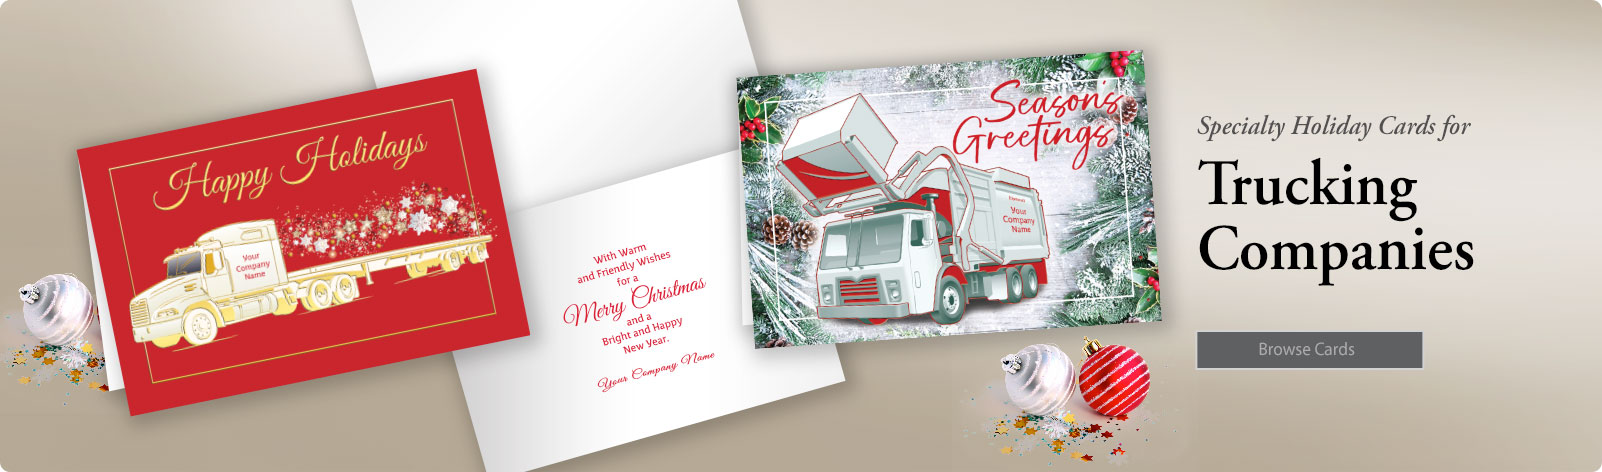 Personalized Trucking & Refuse Christmas Holiday Cards!